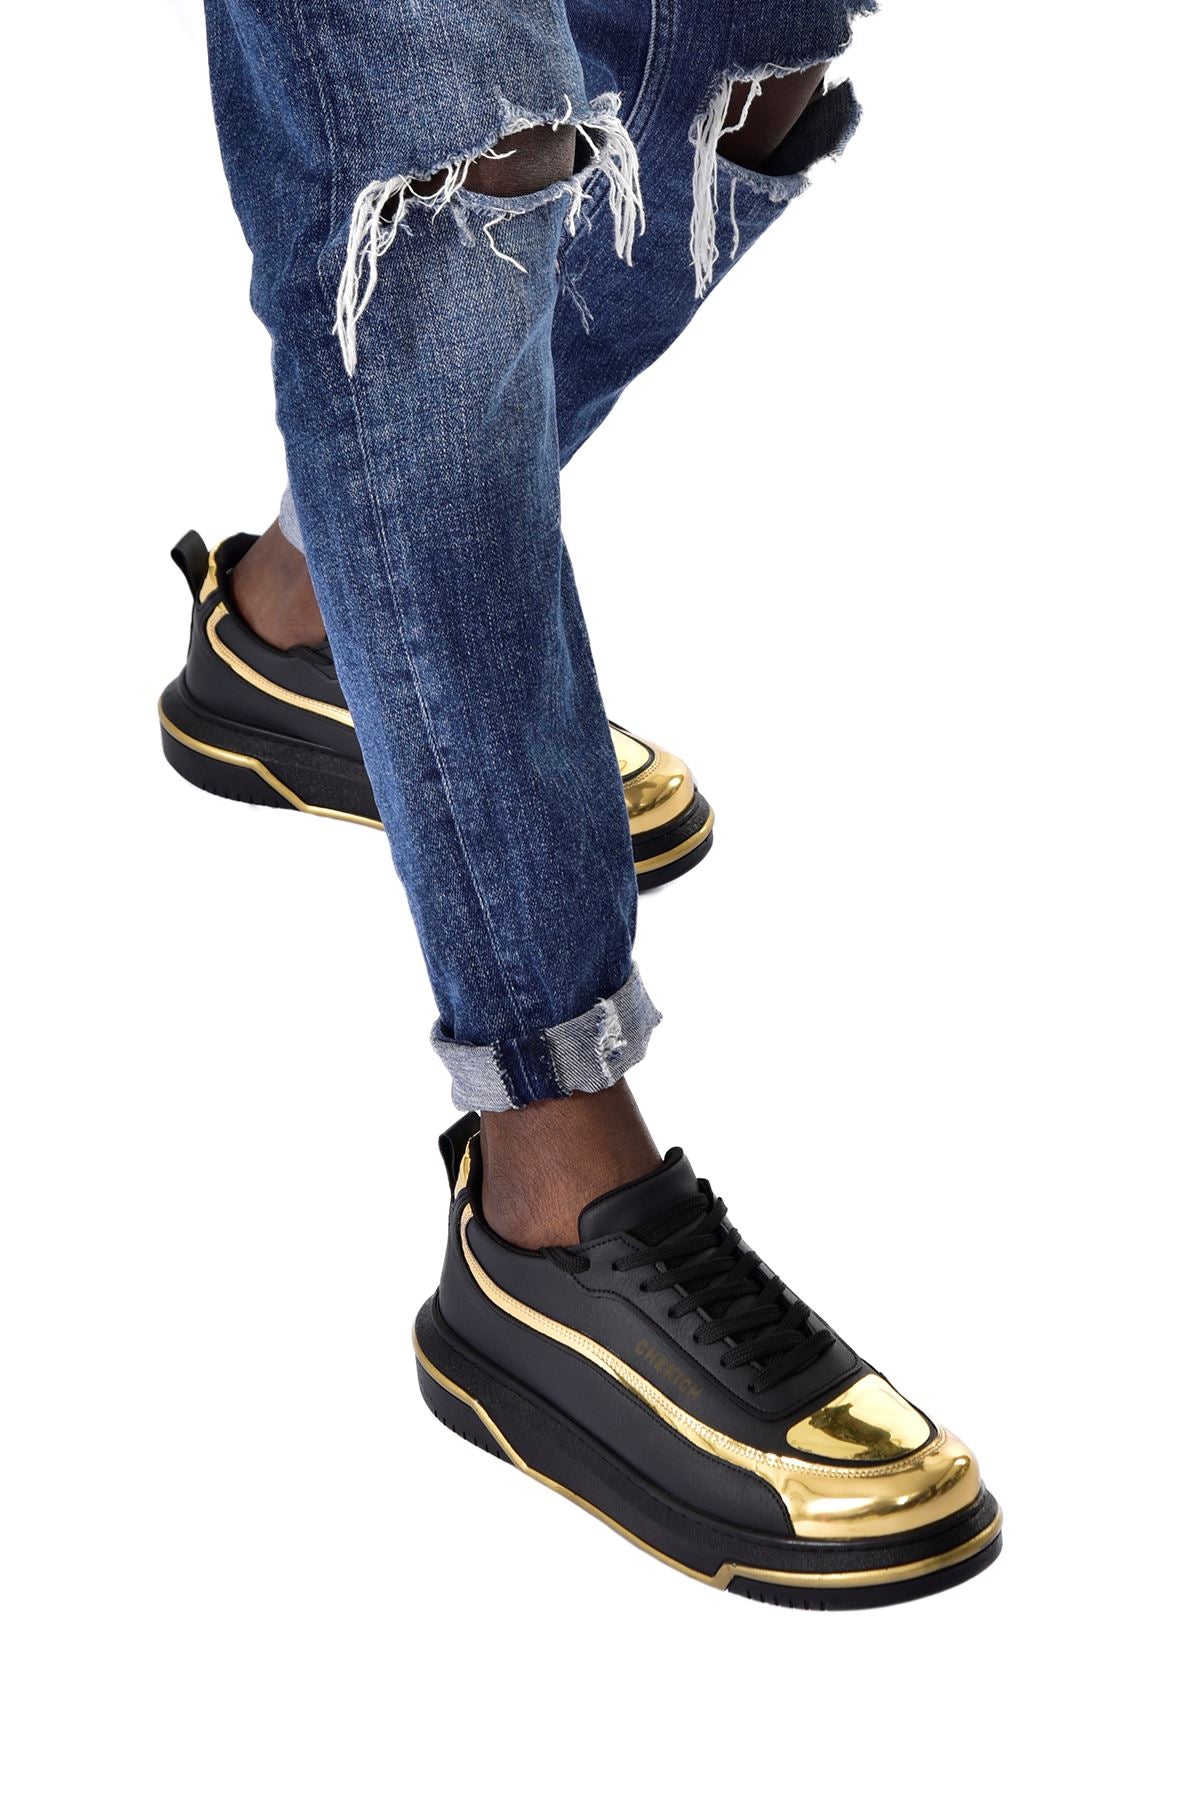 CH241 ST Men's Shoes Sneakers BLACK/GOLD - STREETMODE ™